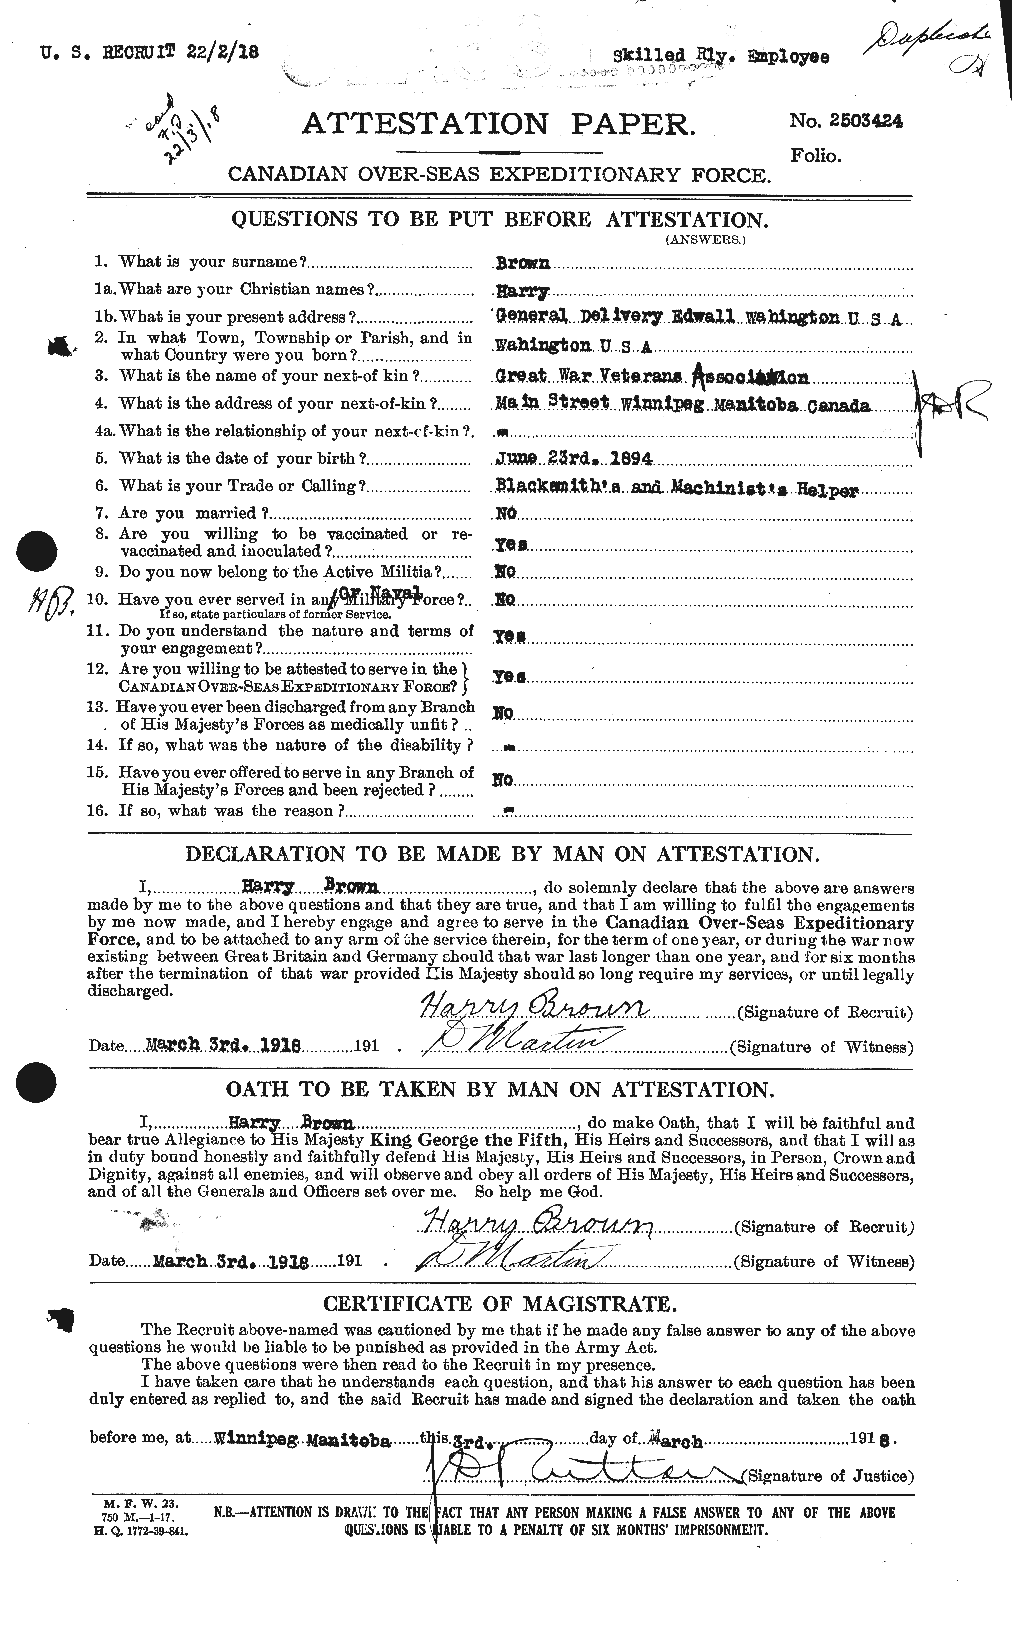 Personnel Records of the First World War - CEF 265413a